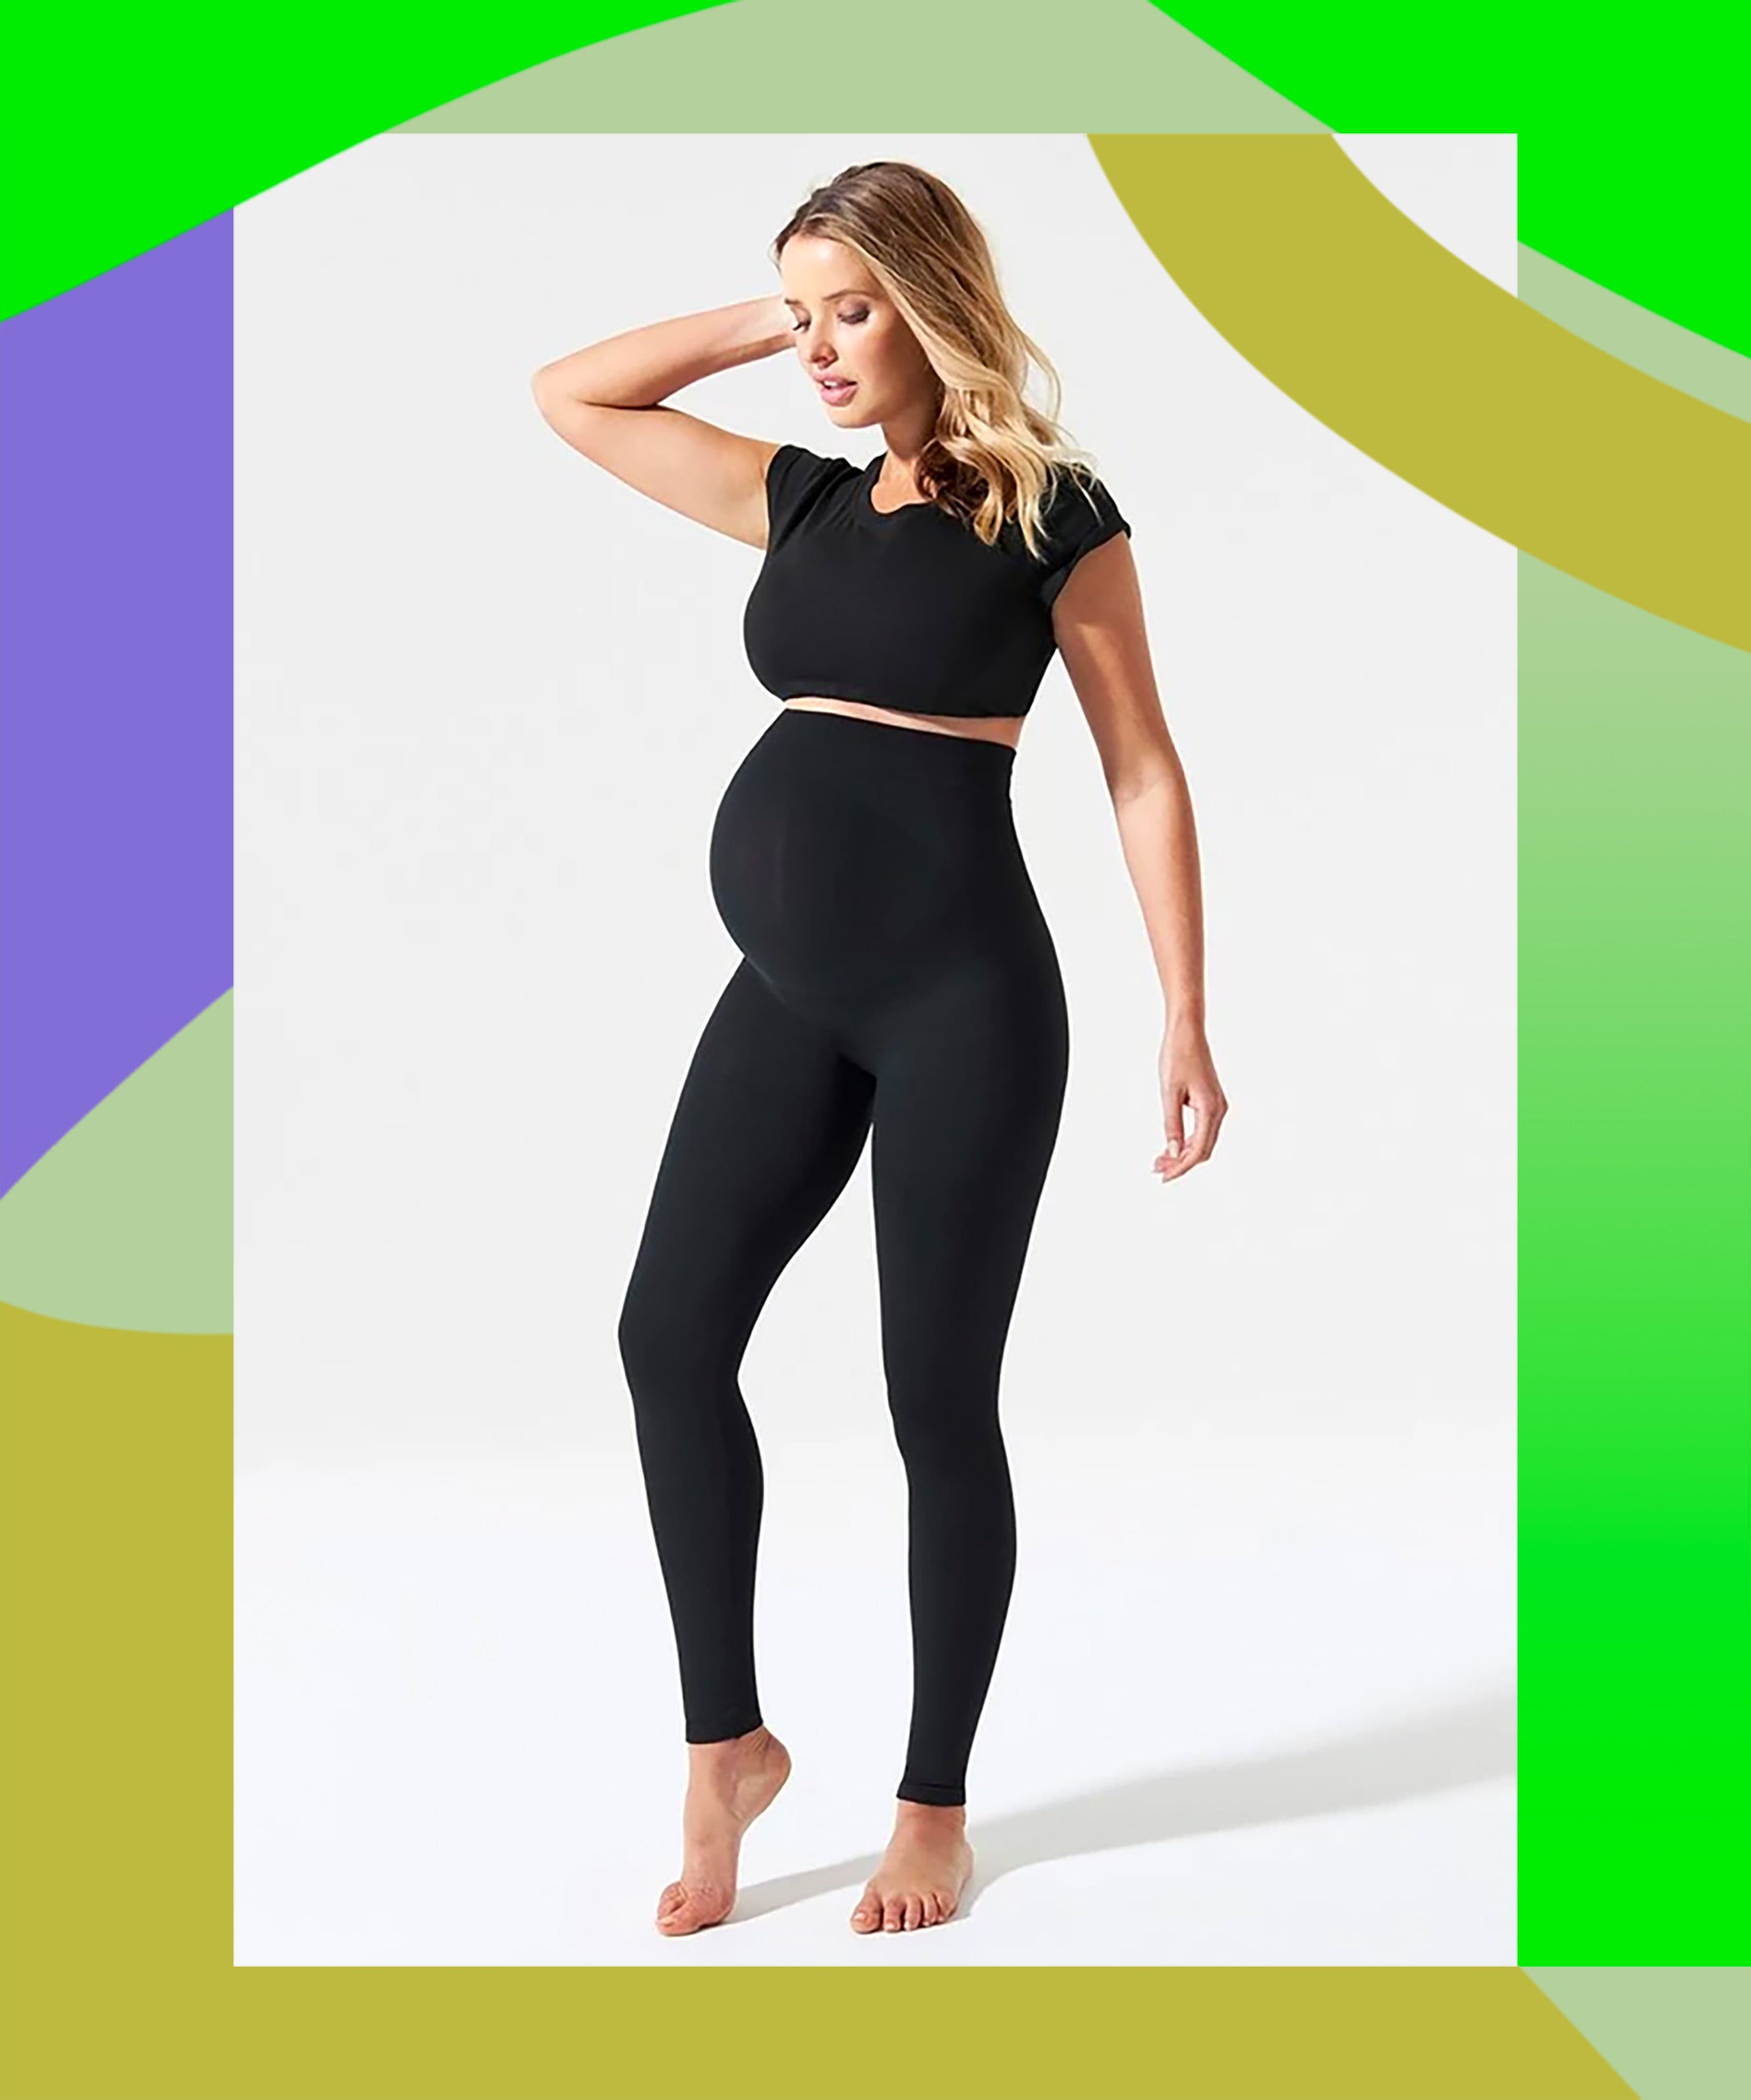 The 10 Best Maternity Workout Clothes